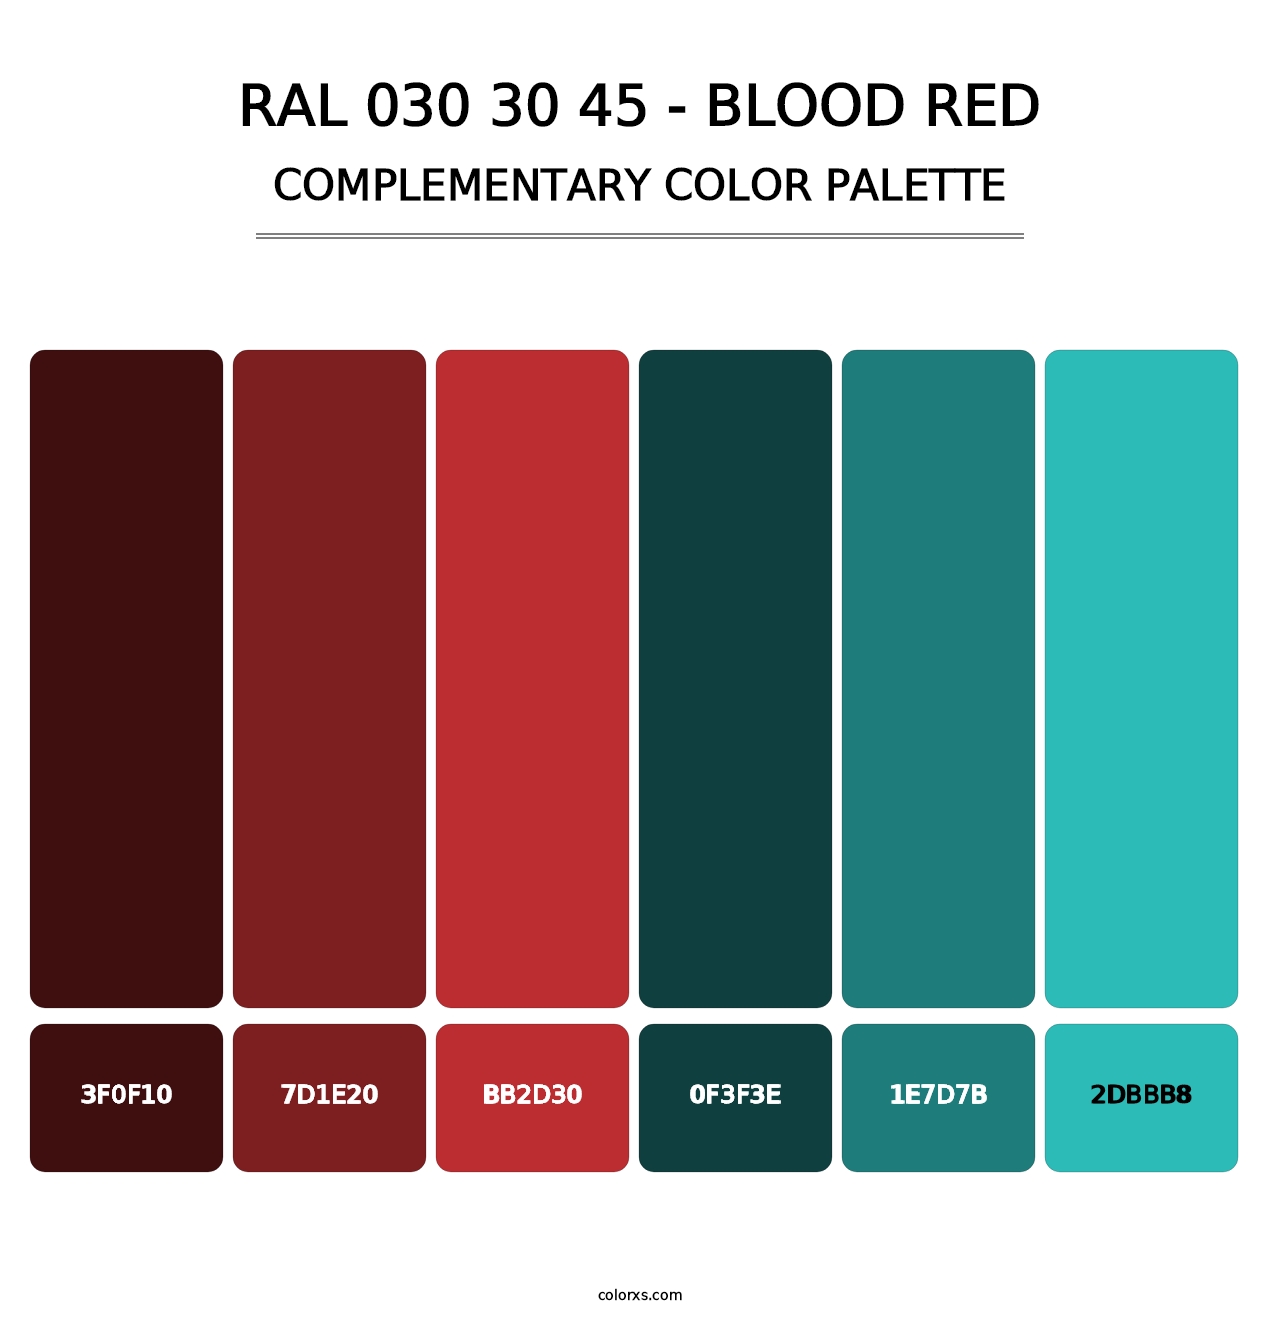 RAL 030 30 45 - Blood Red - Complementary Color Palette